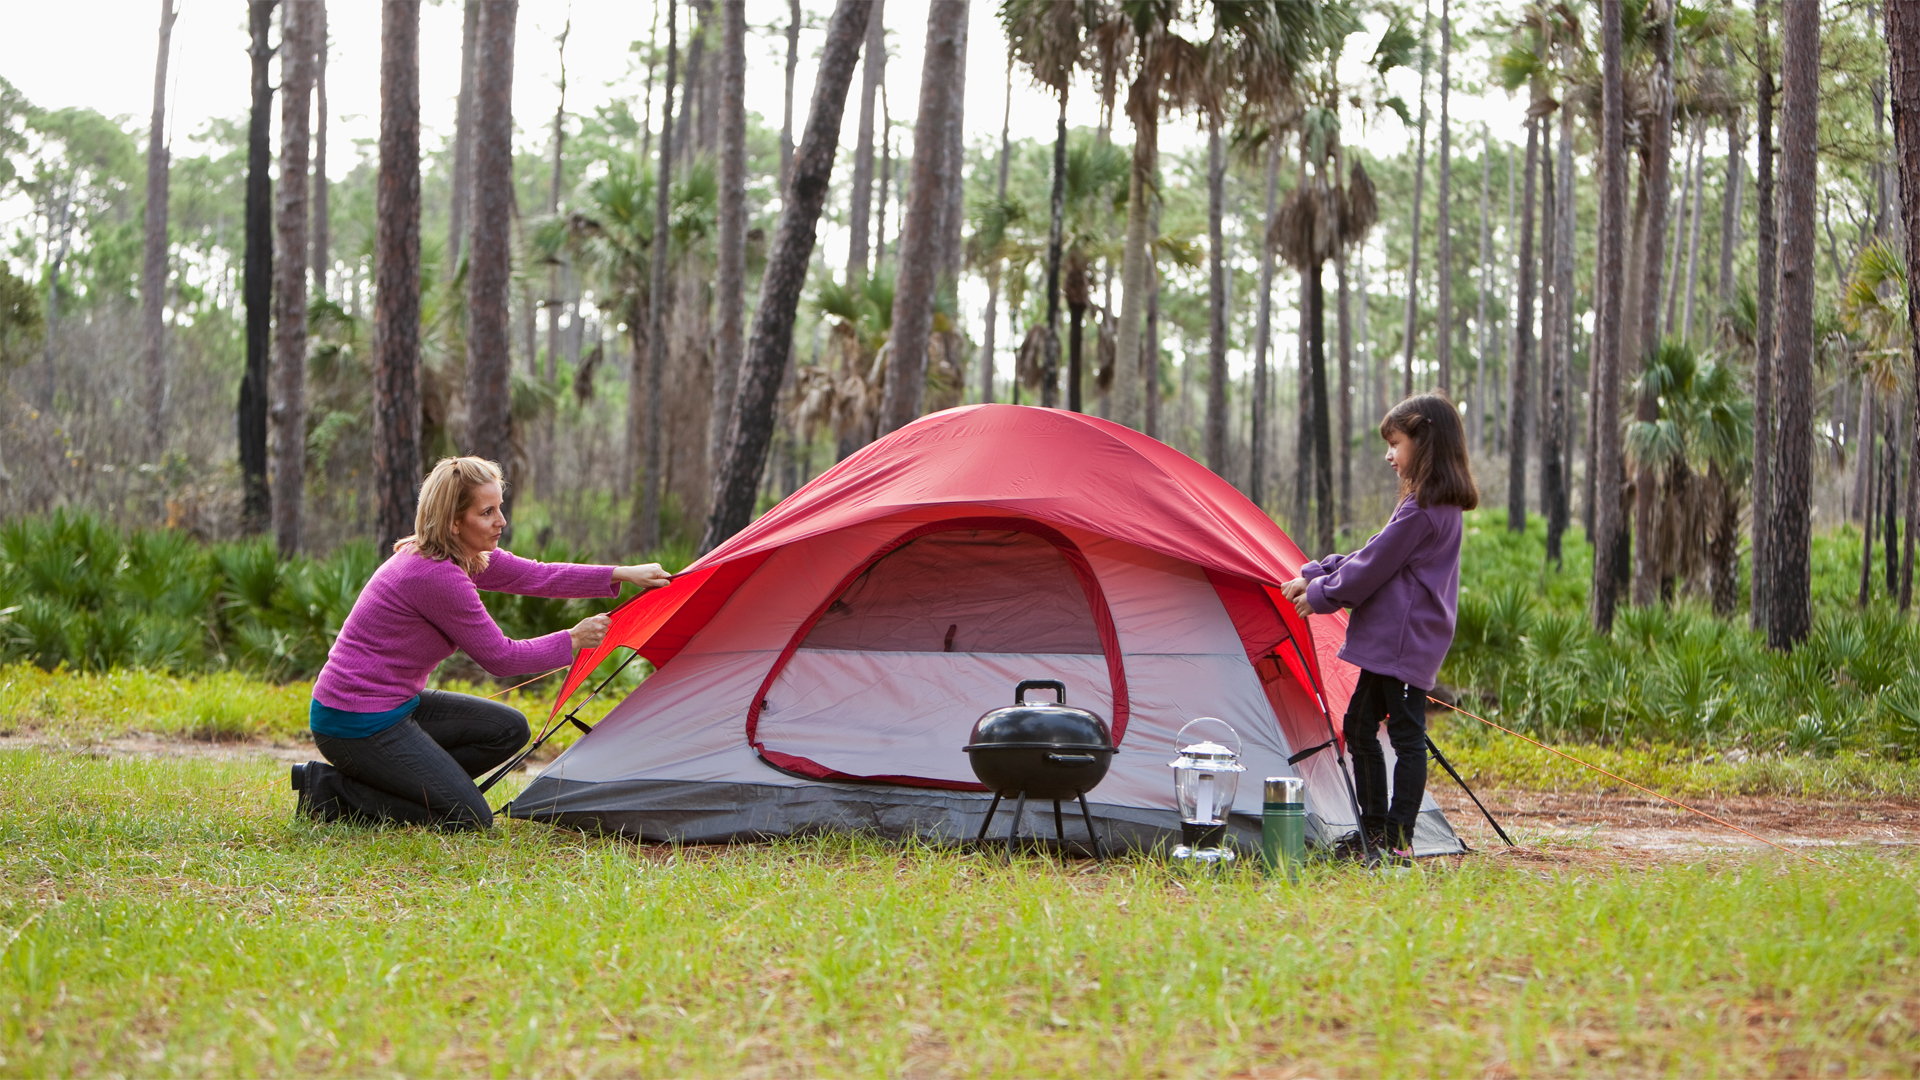 How To Pitch A Tent How to pitch a tent: our tips for quick, secure assembly | Advnture